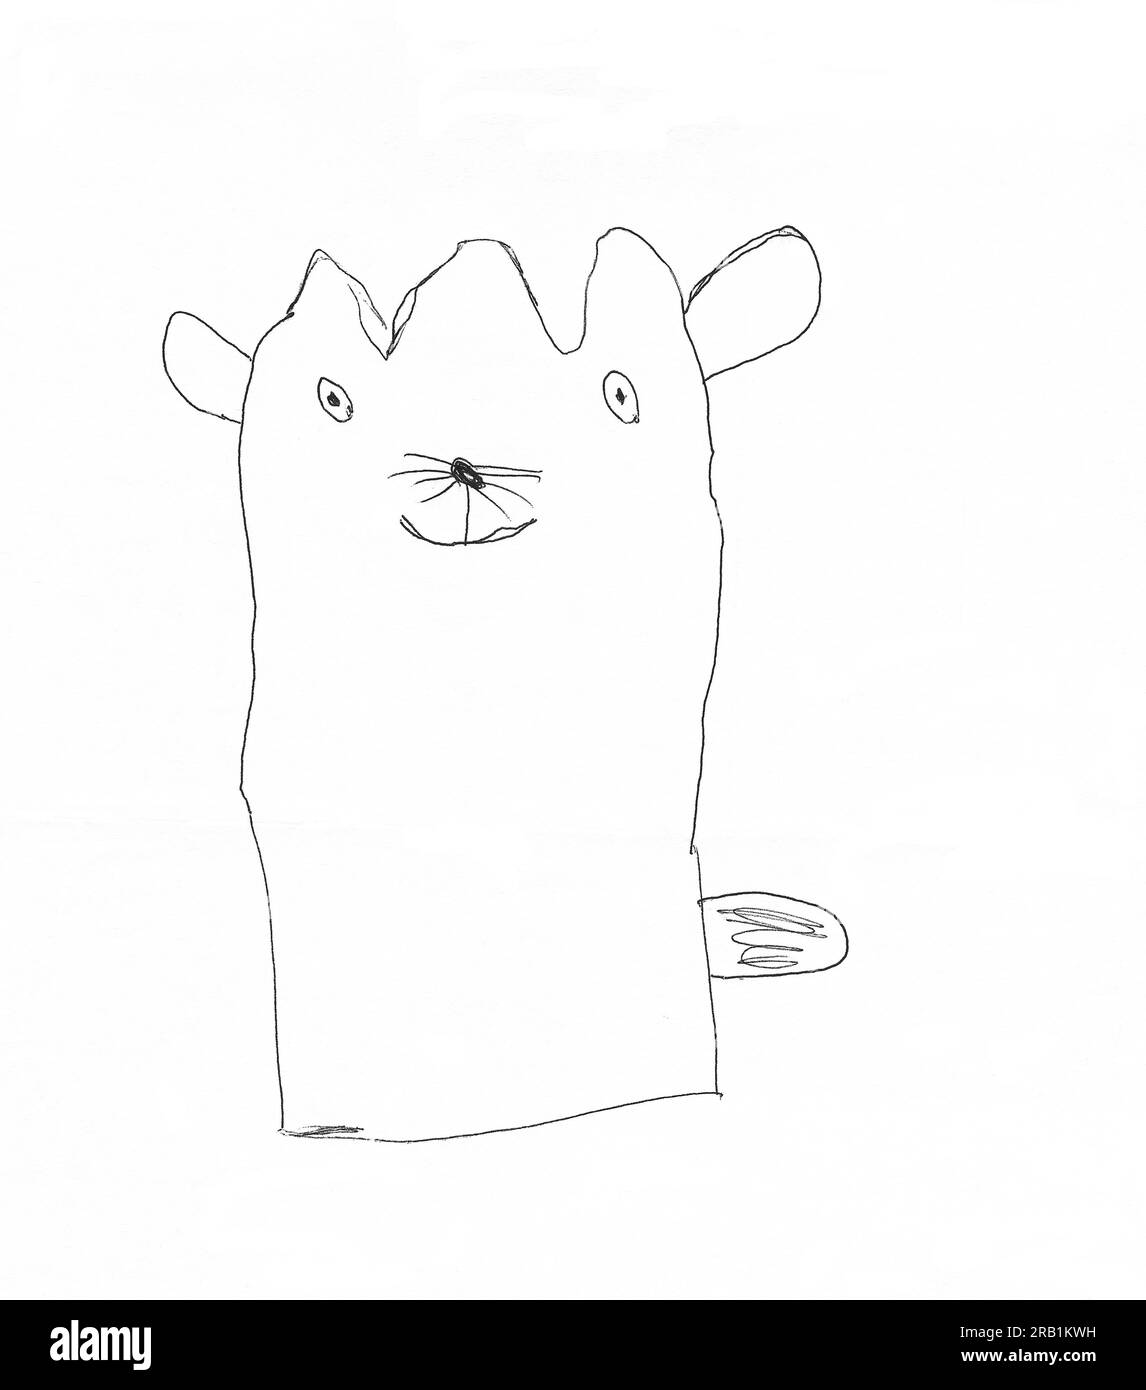 Children's drawing - simple cat on a white background. Drawing by a child's hand. Children's illustration Stock Photo